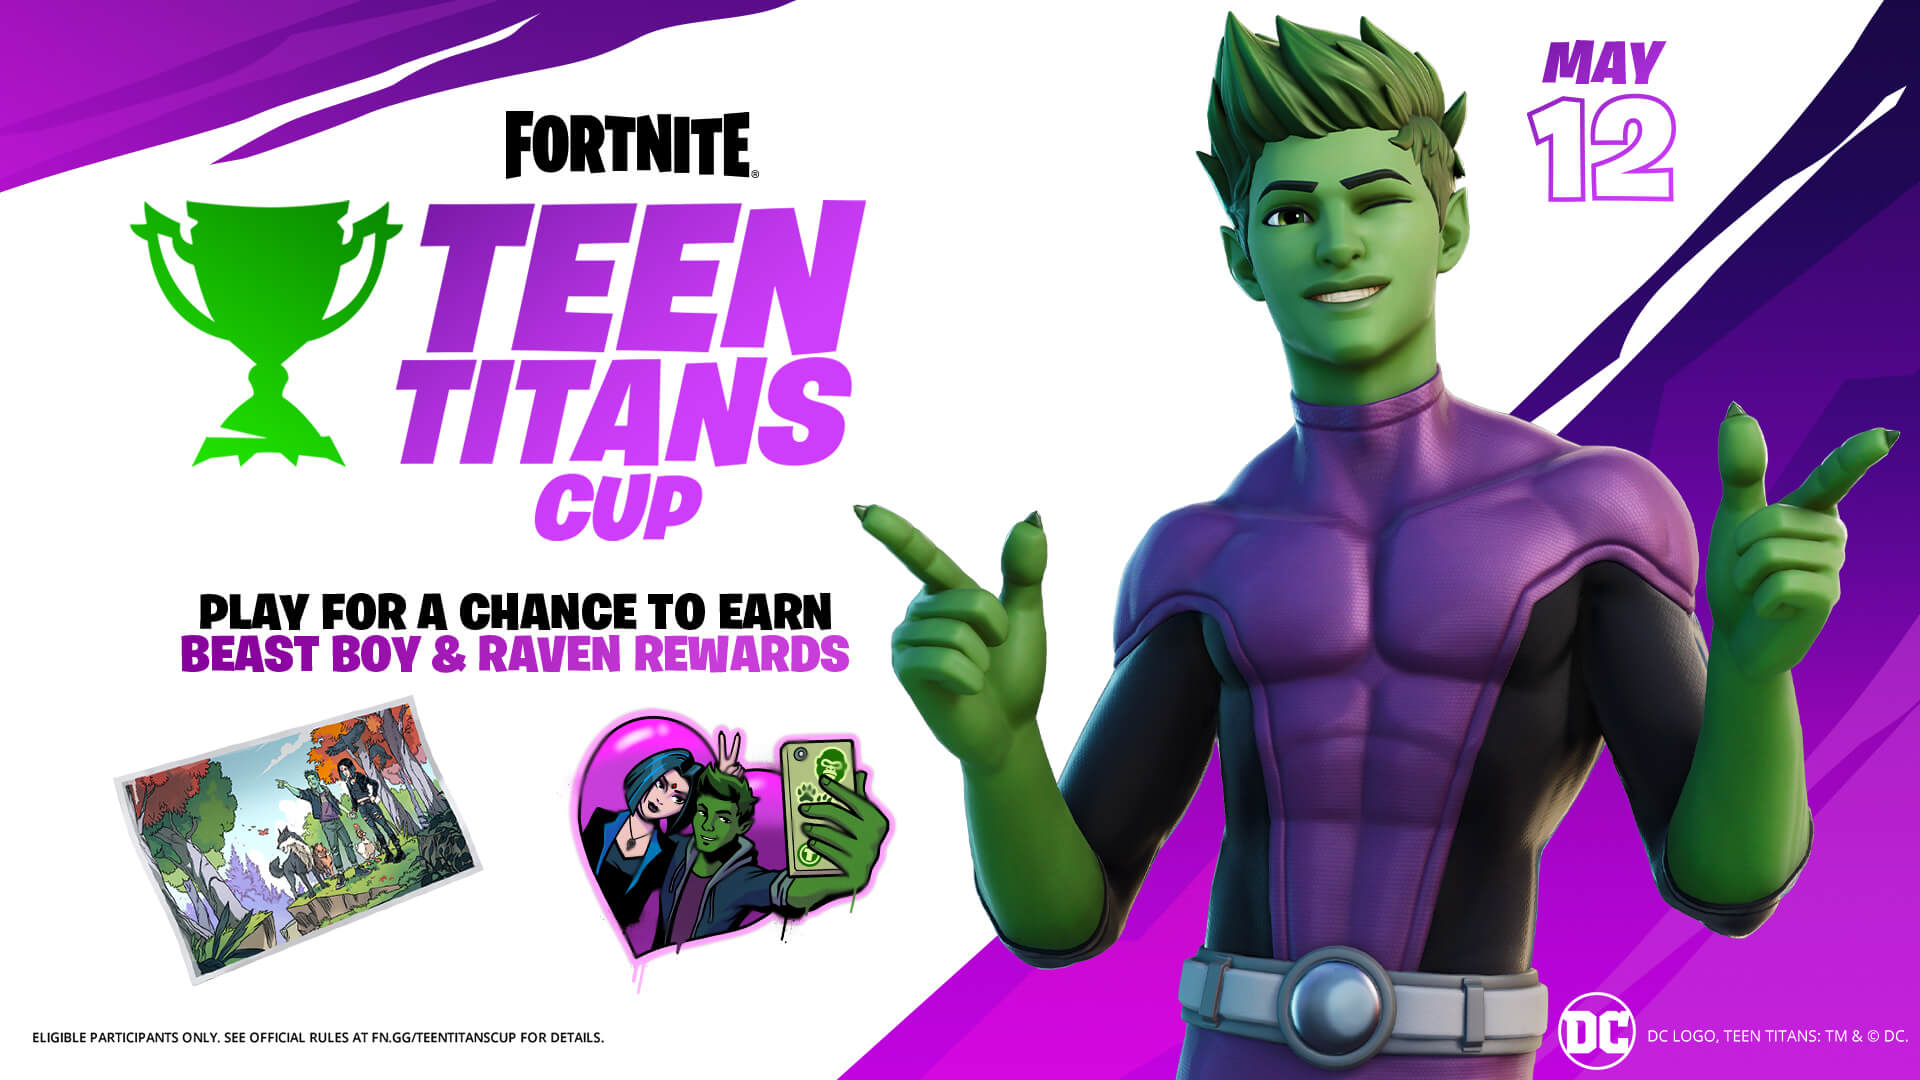 The Fortnite Teen Titans Cup takes place May 12